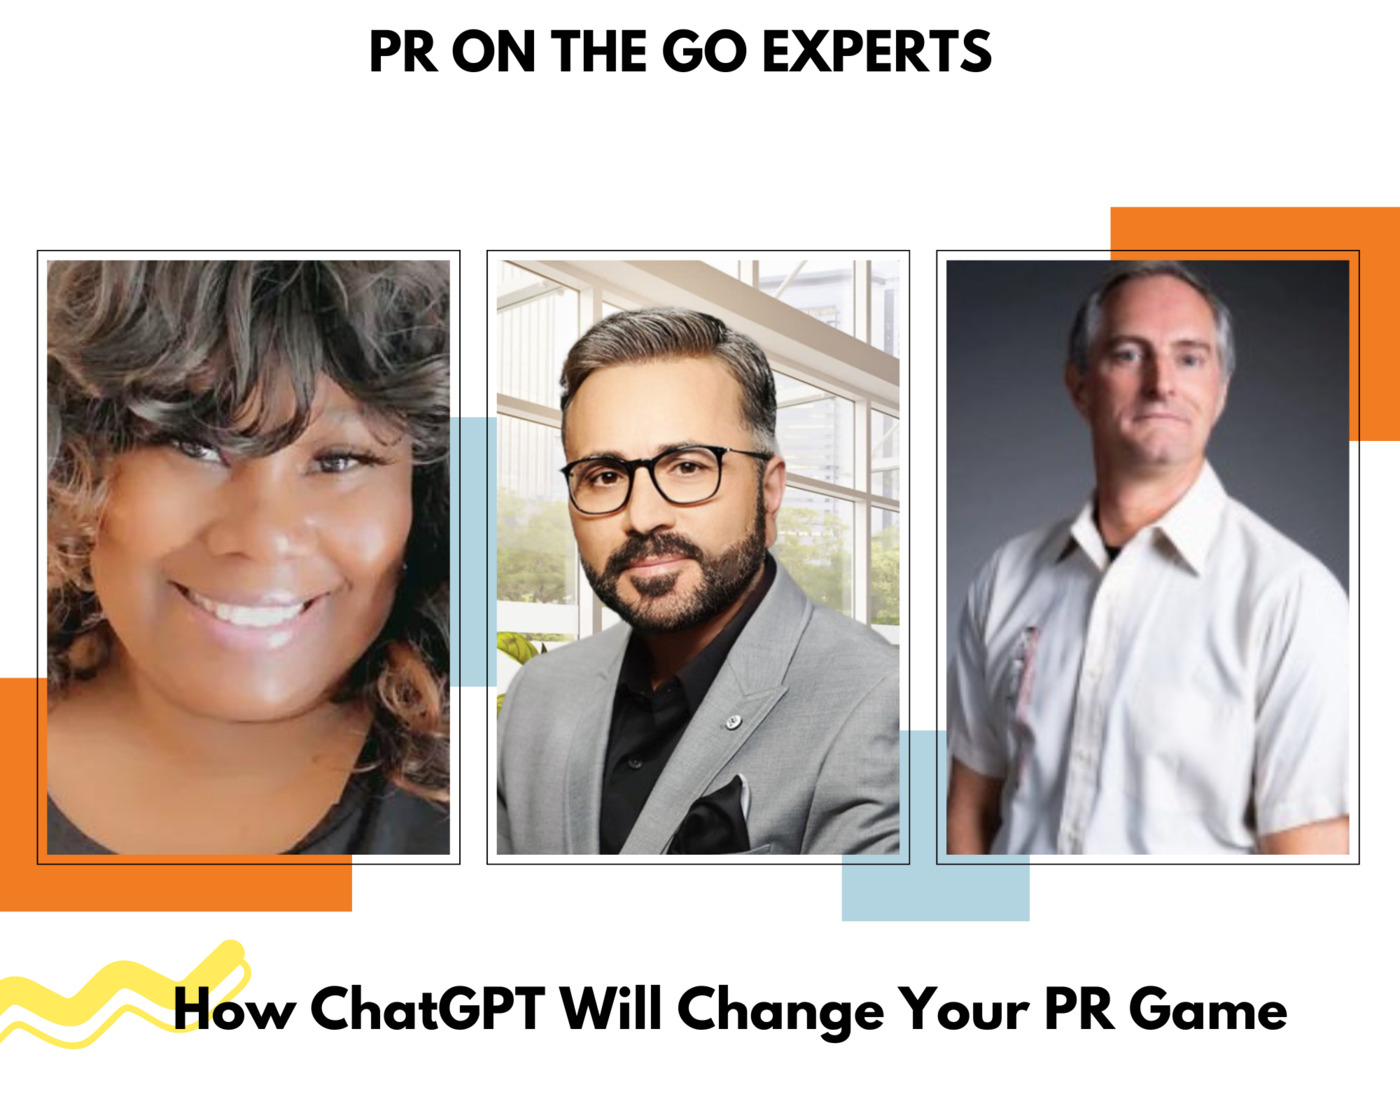 How ChatGPT Will Change Your PR Game